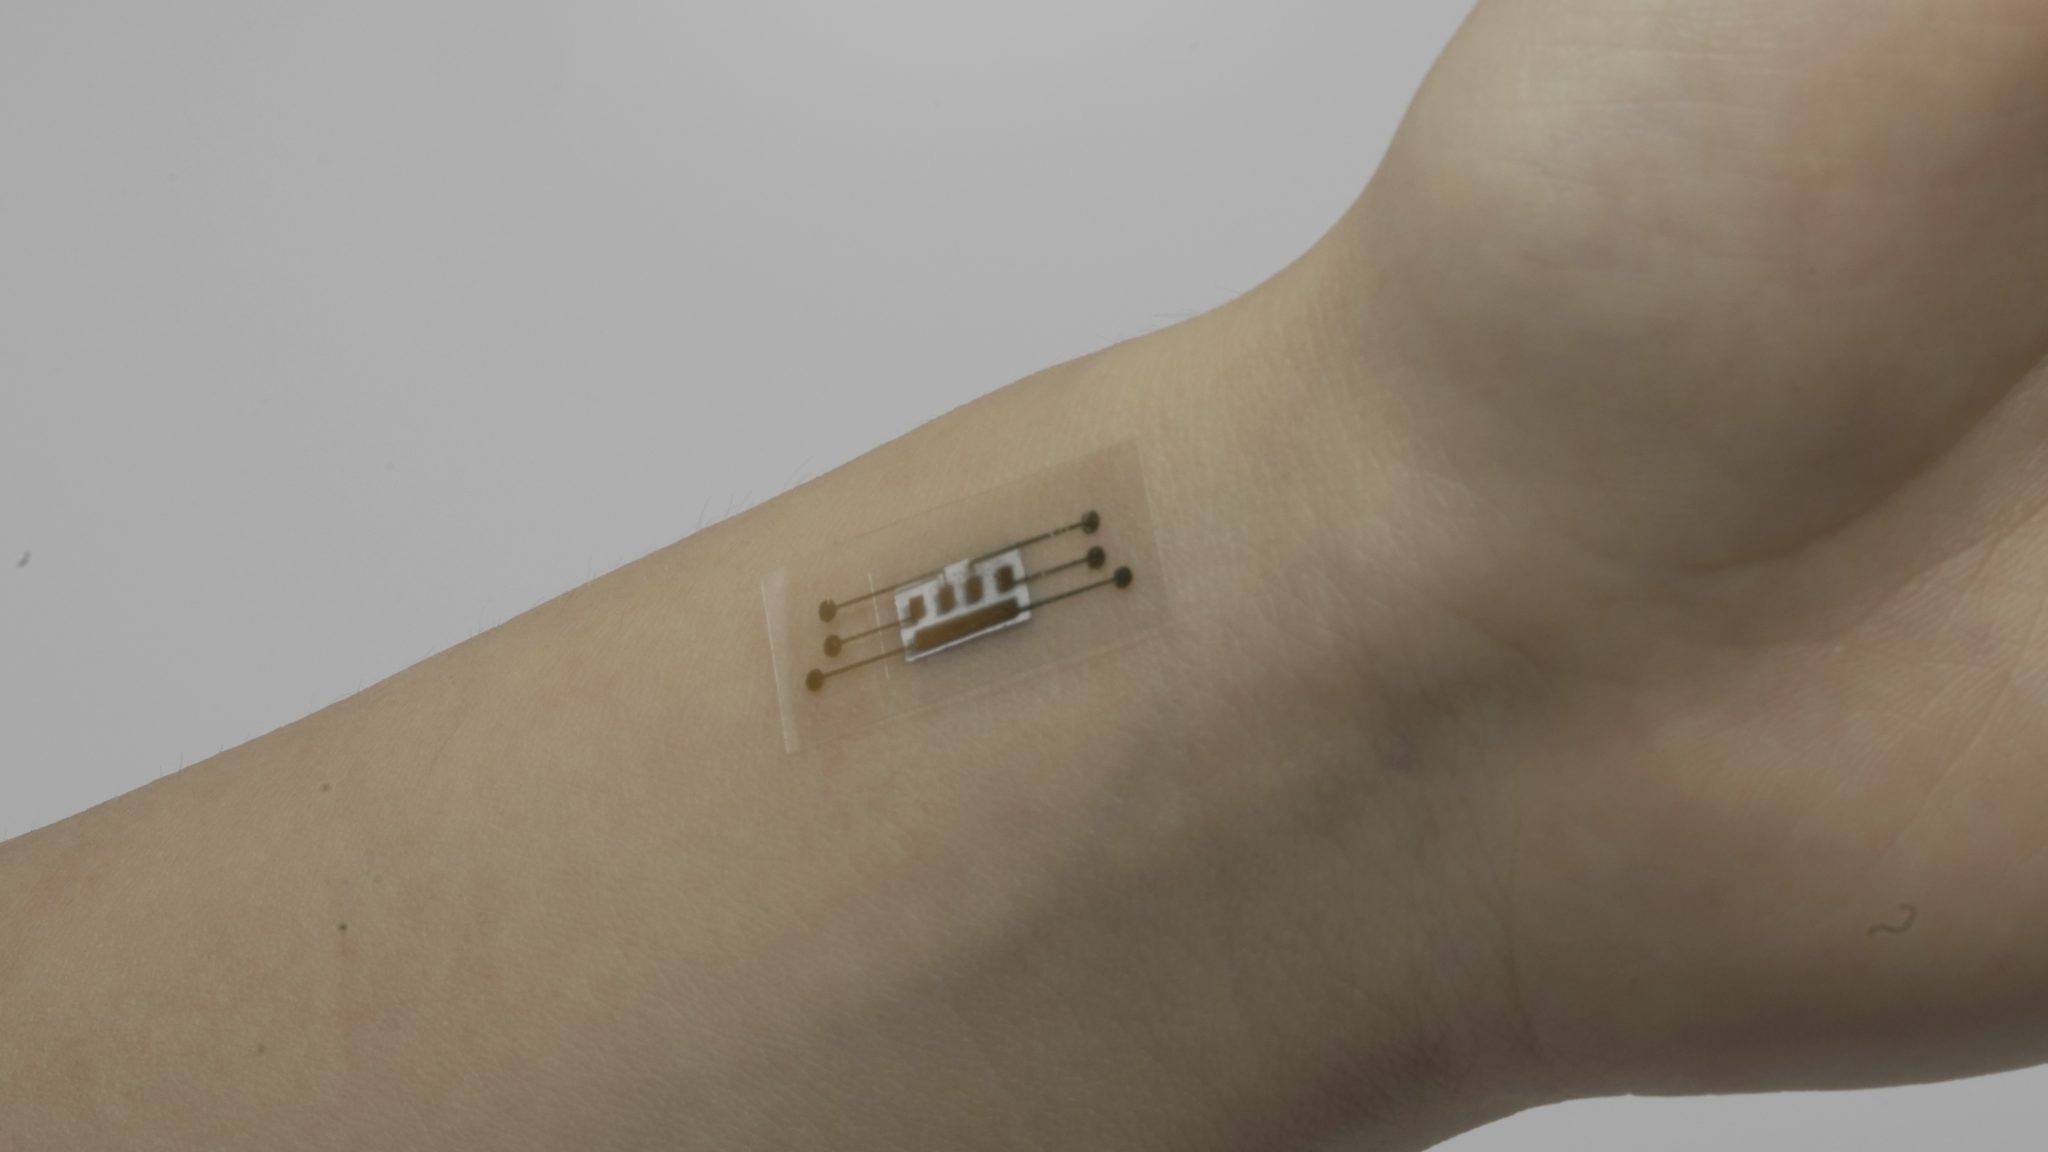 Sensor patches using the TRACE material could be used to develop more reliable wearable health sensors